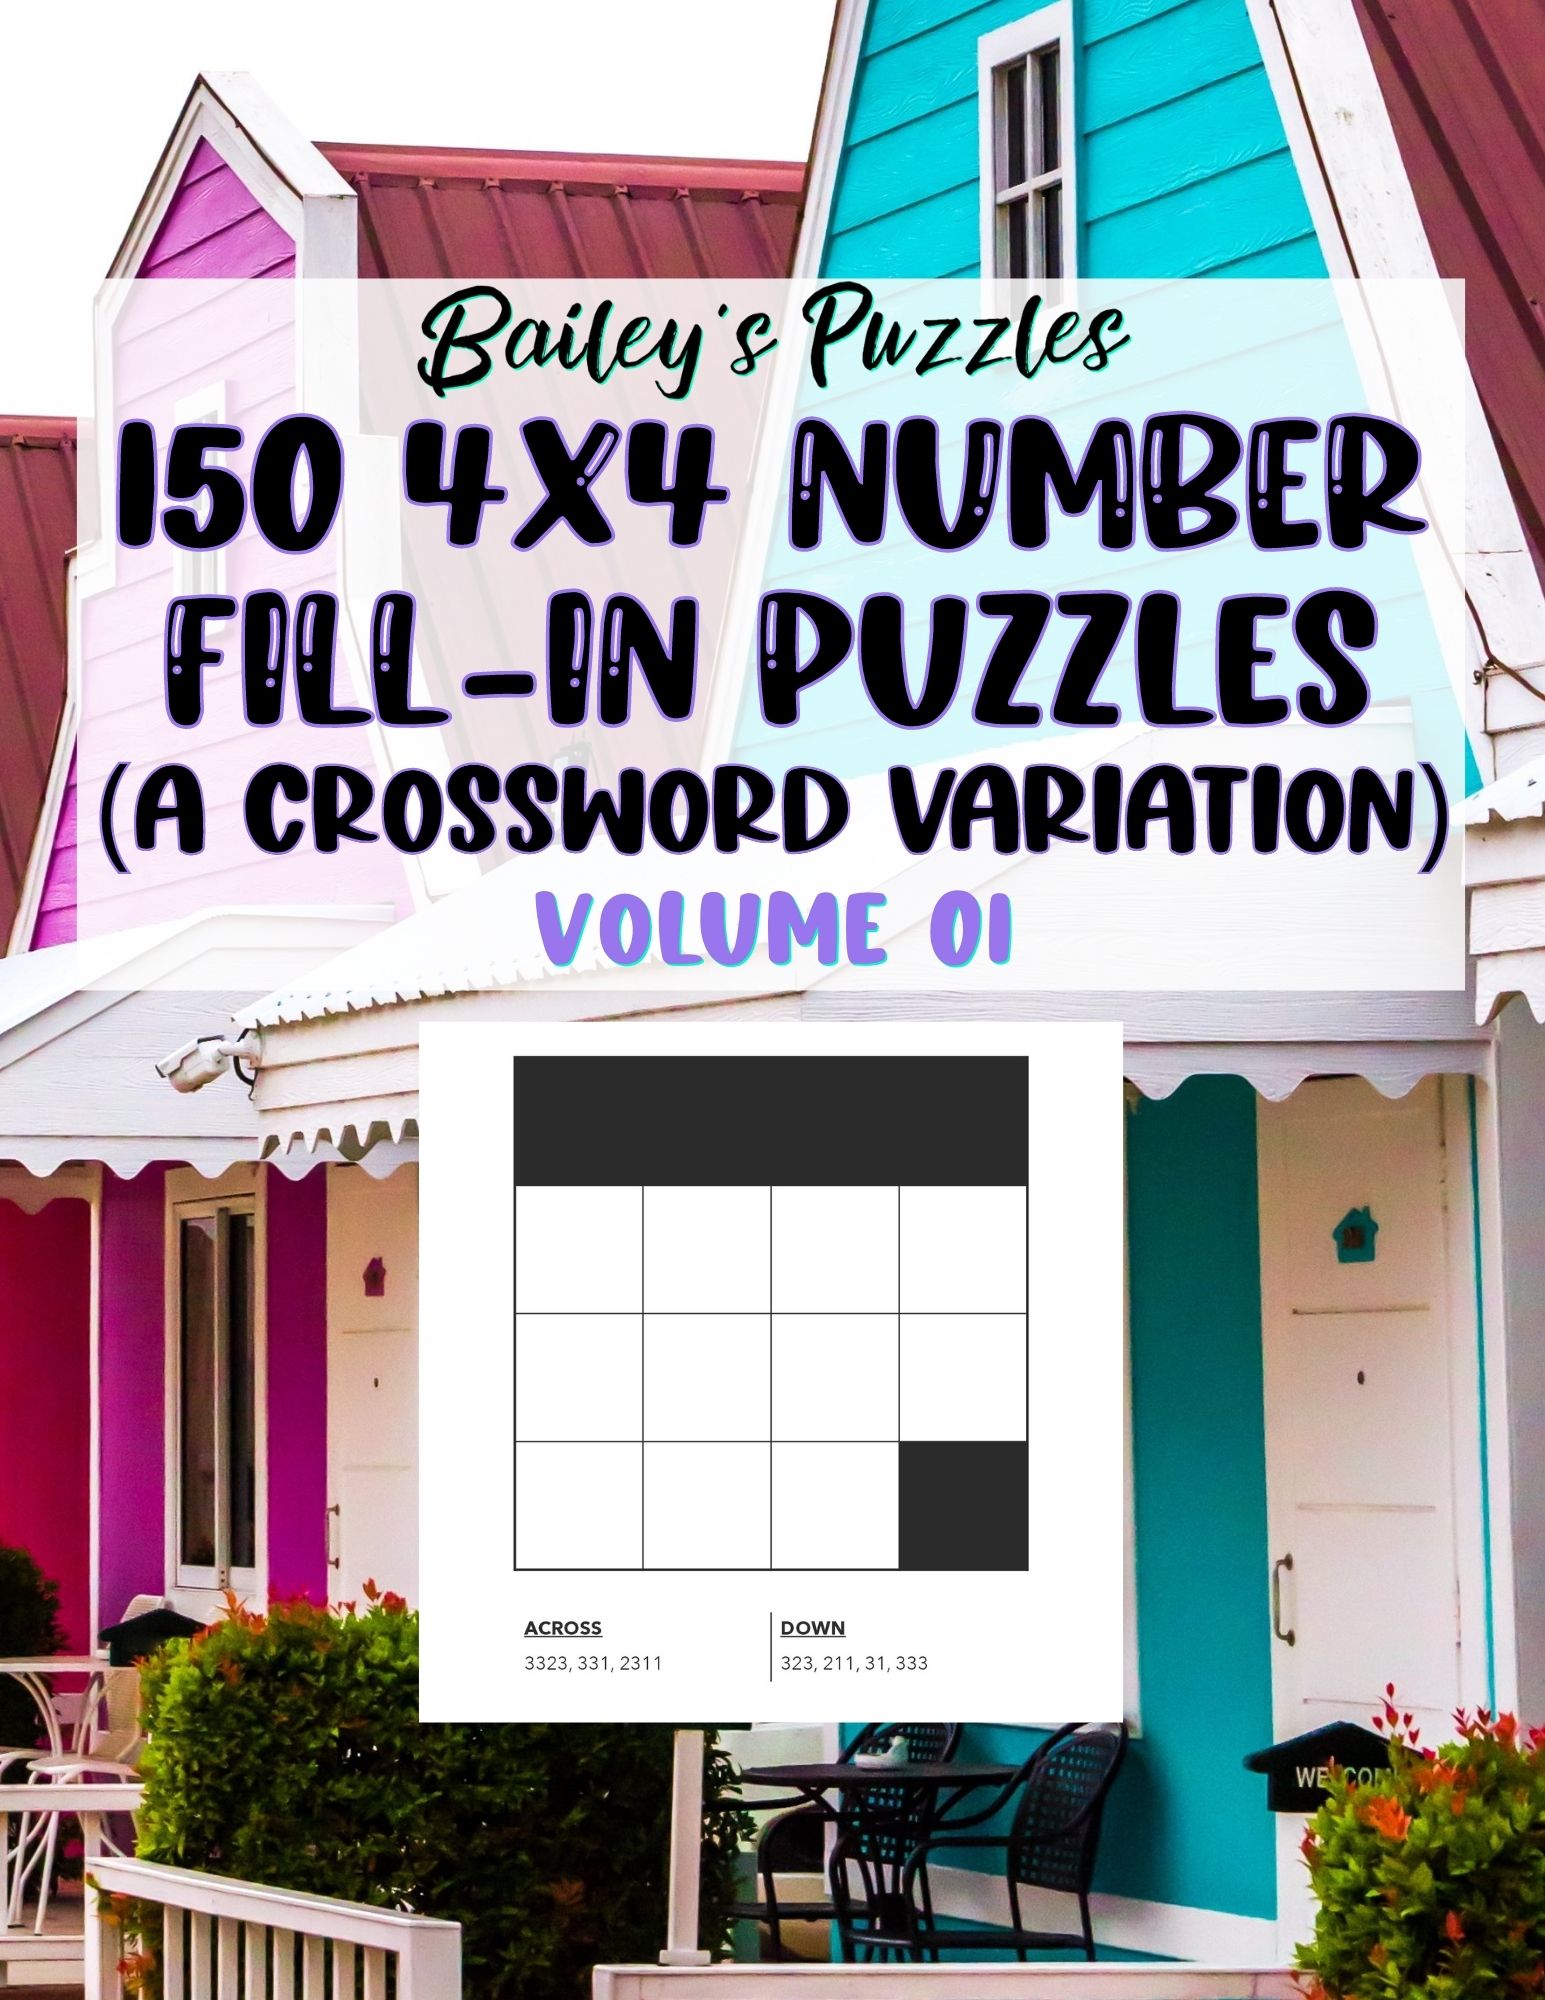 Front Cover - 150 4x4 Number Fill-In Puzzles (a crossword variation): volume 1